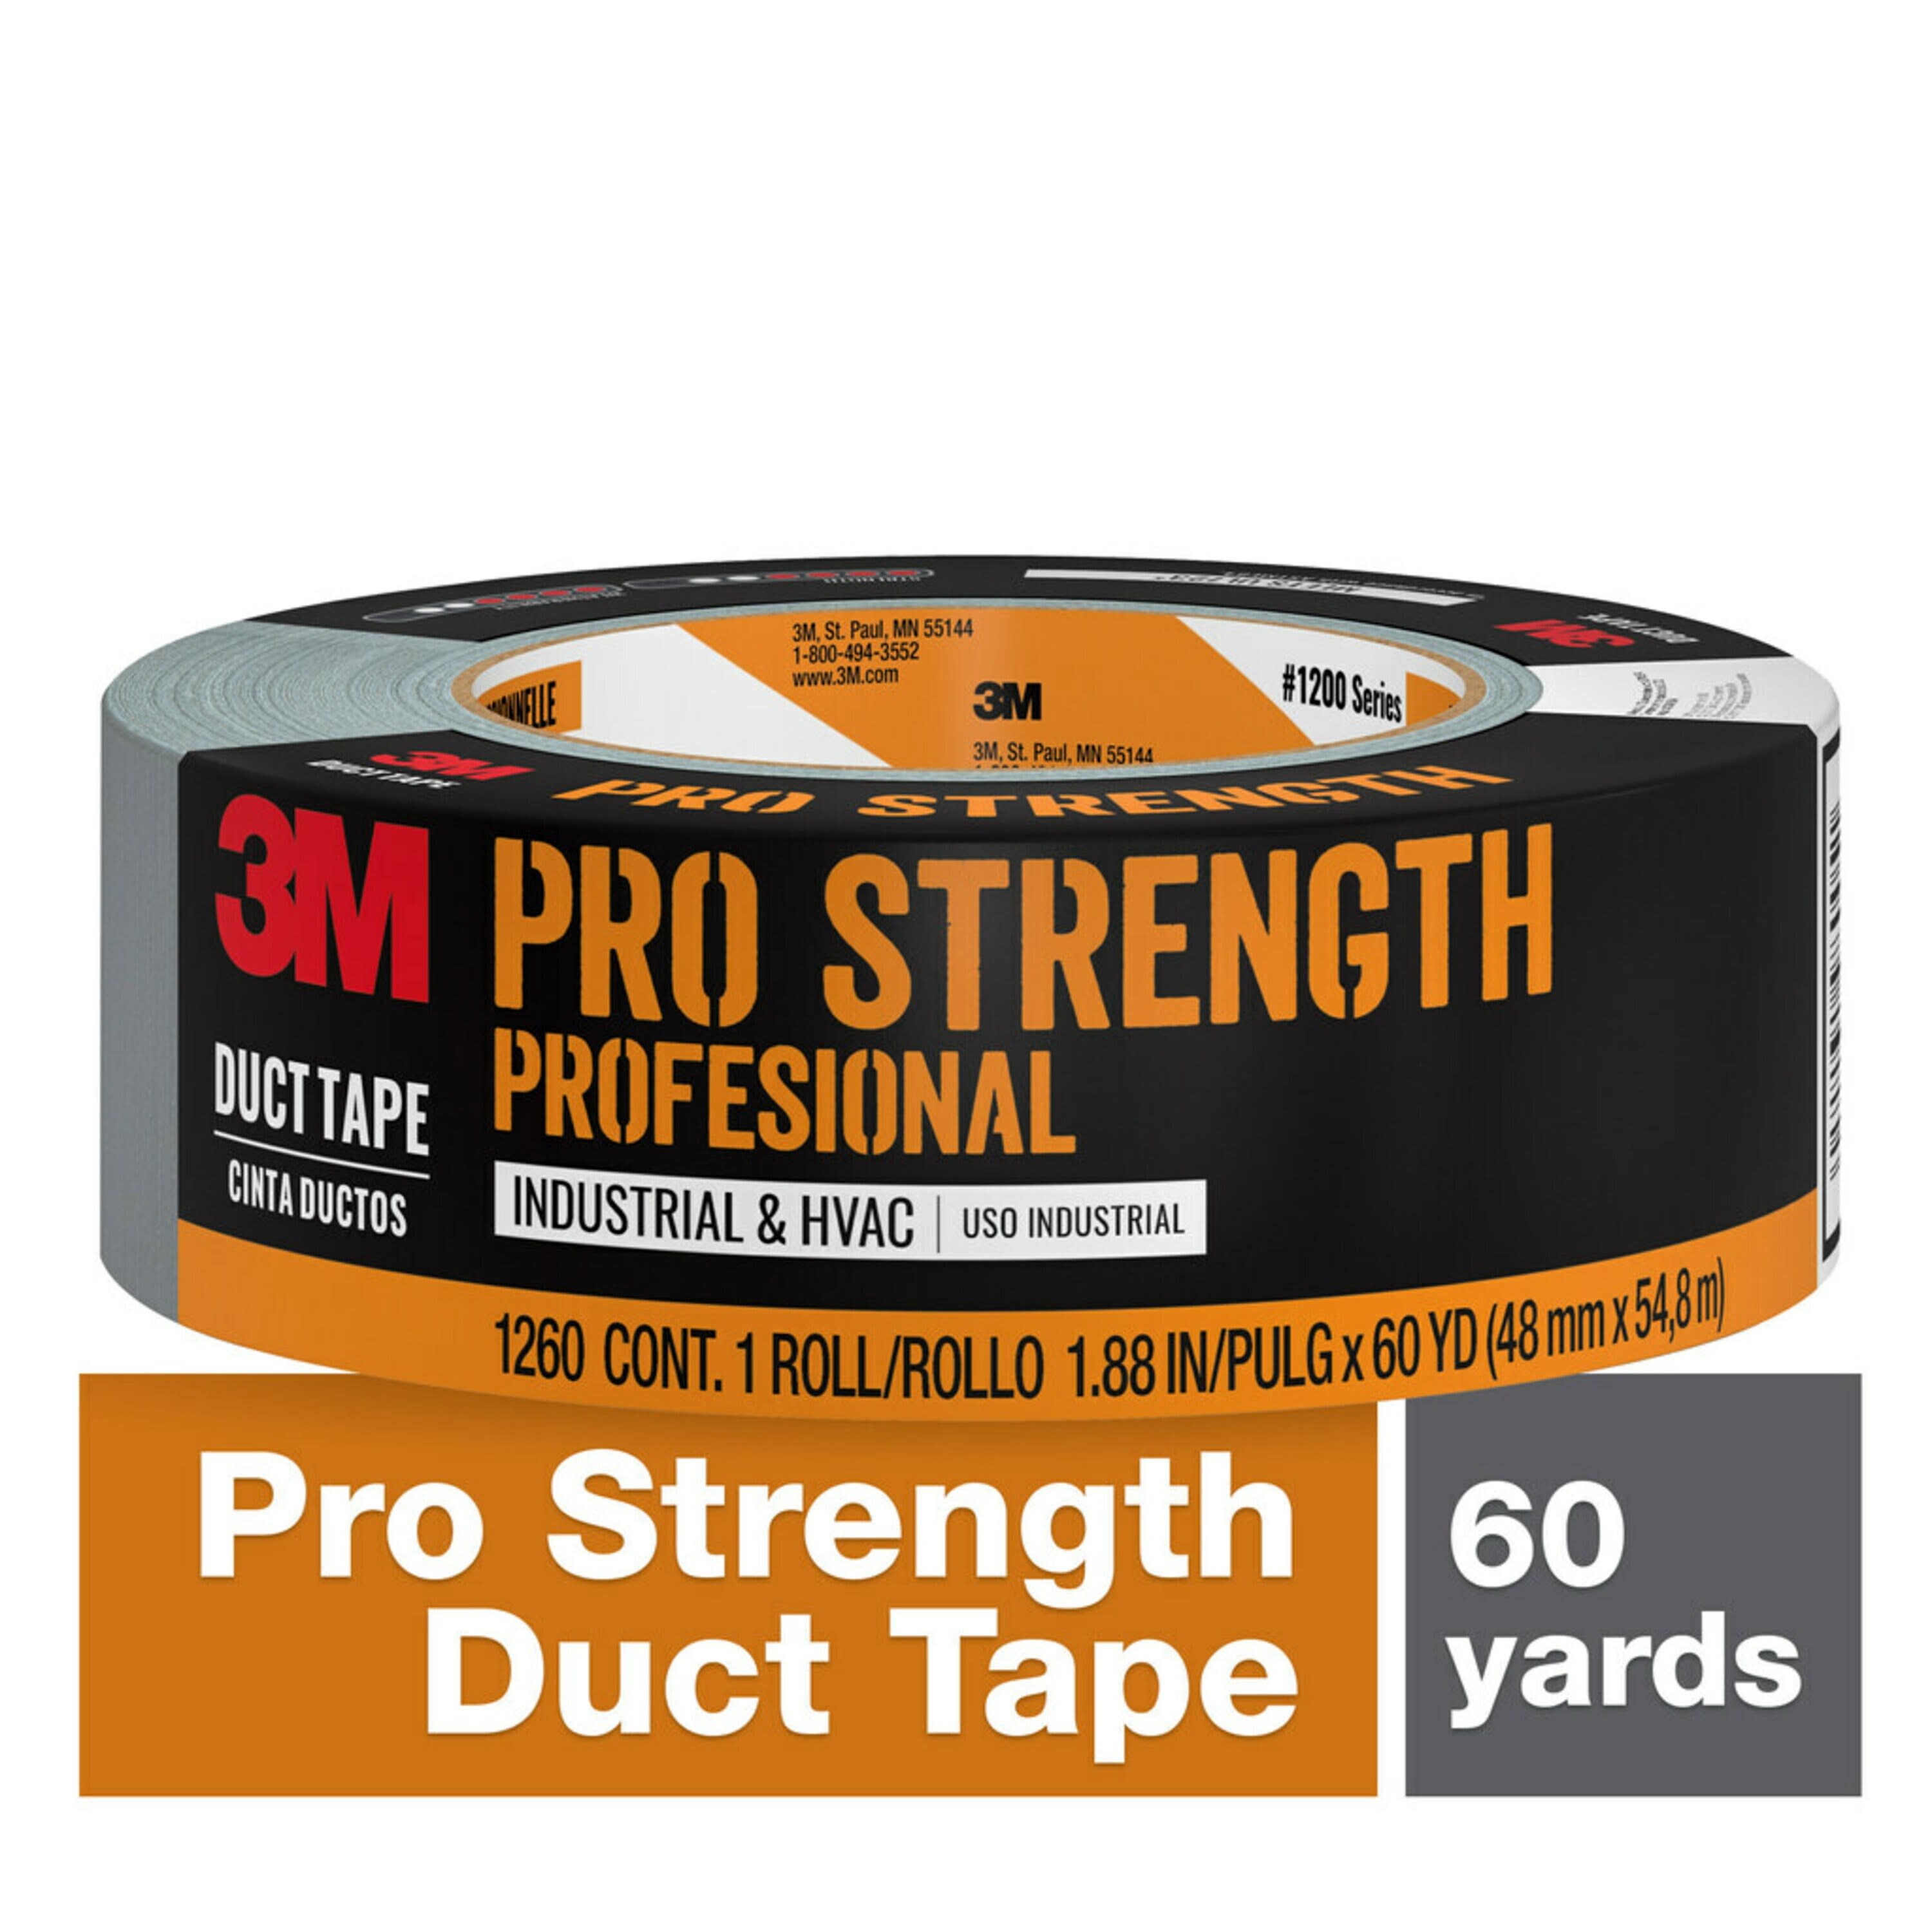 Rite Aid Home Duct Tape, 1.88 in x 60 yds